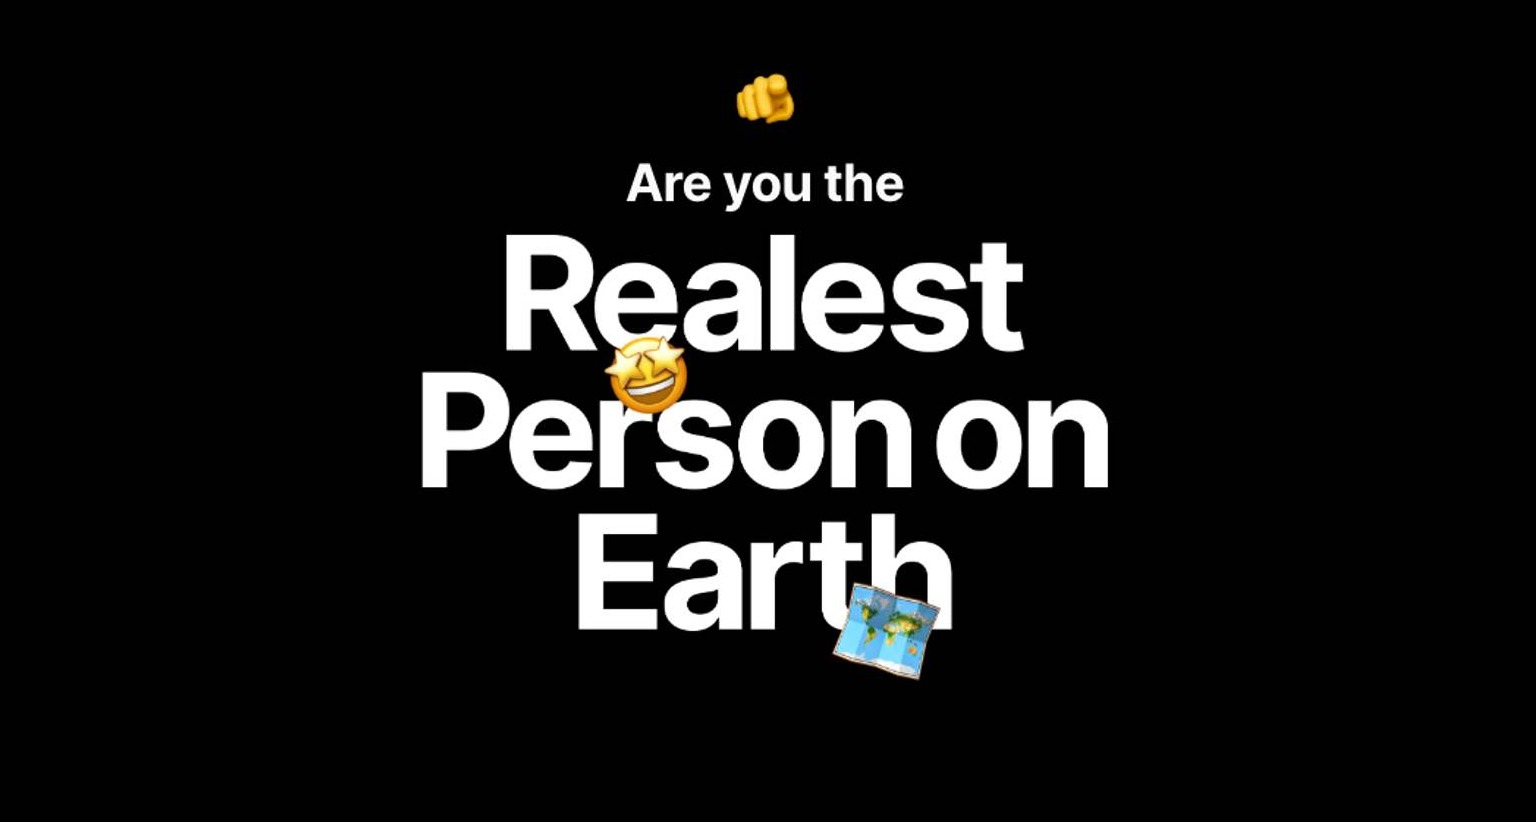 Reales Person on Earth